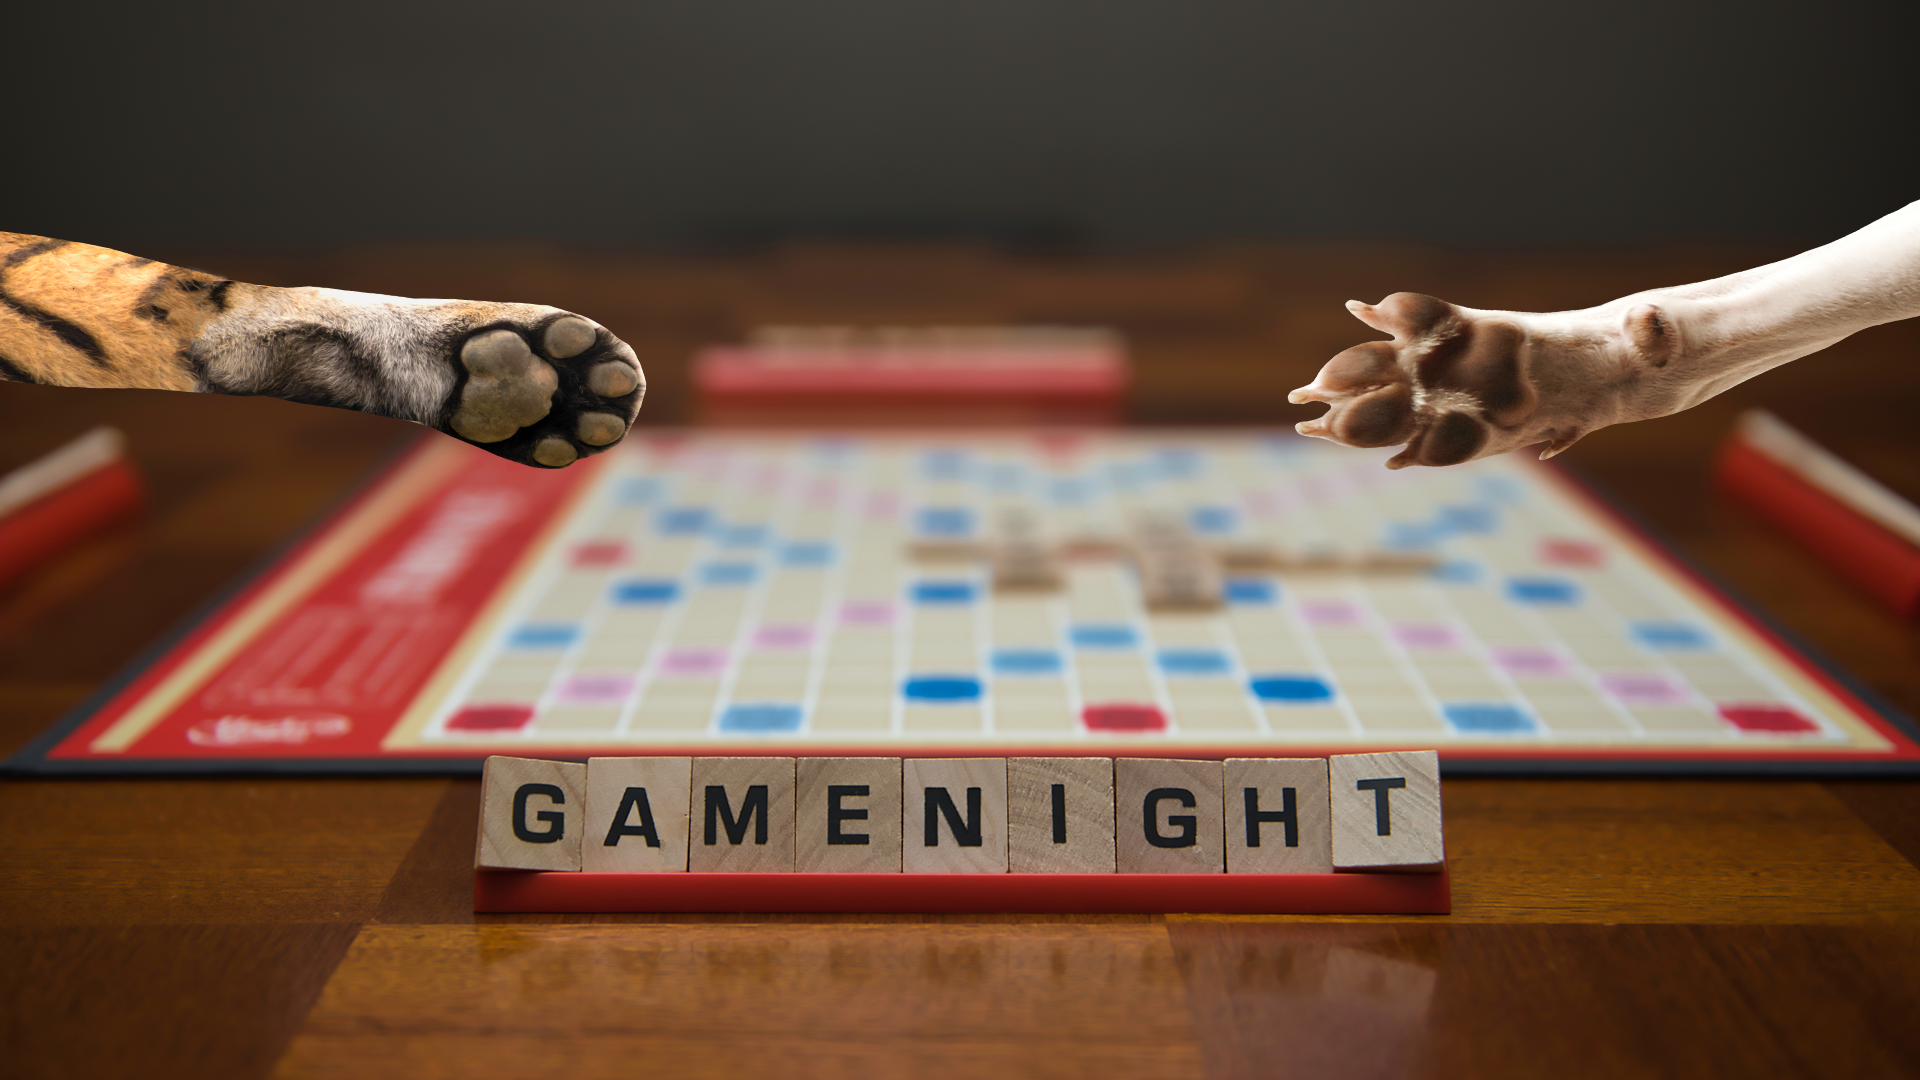 Two animal paws hovering over a Scrabble style game with game tiles spelling 'Game Night' in the foreground